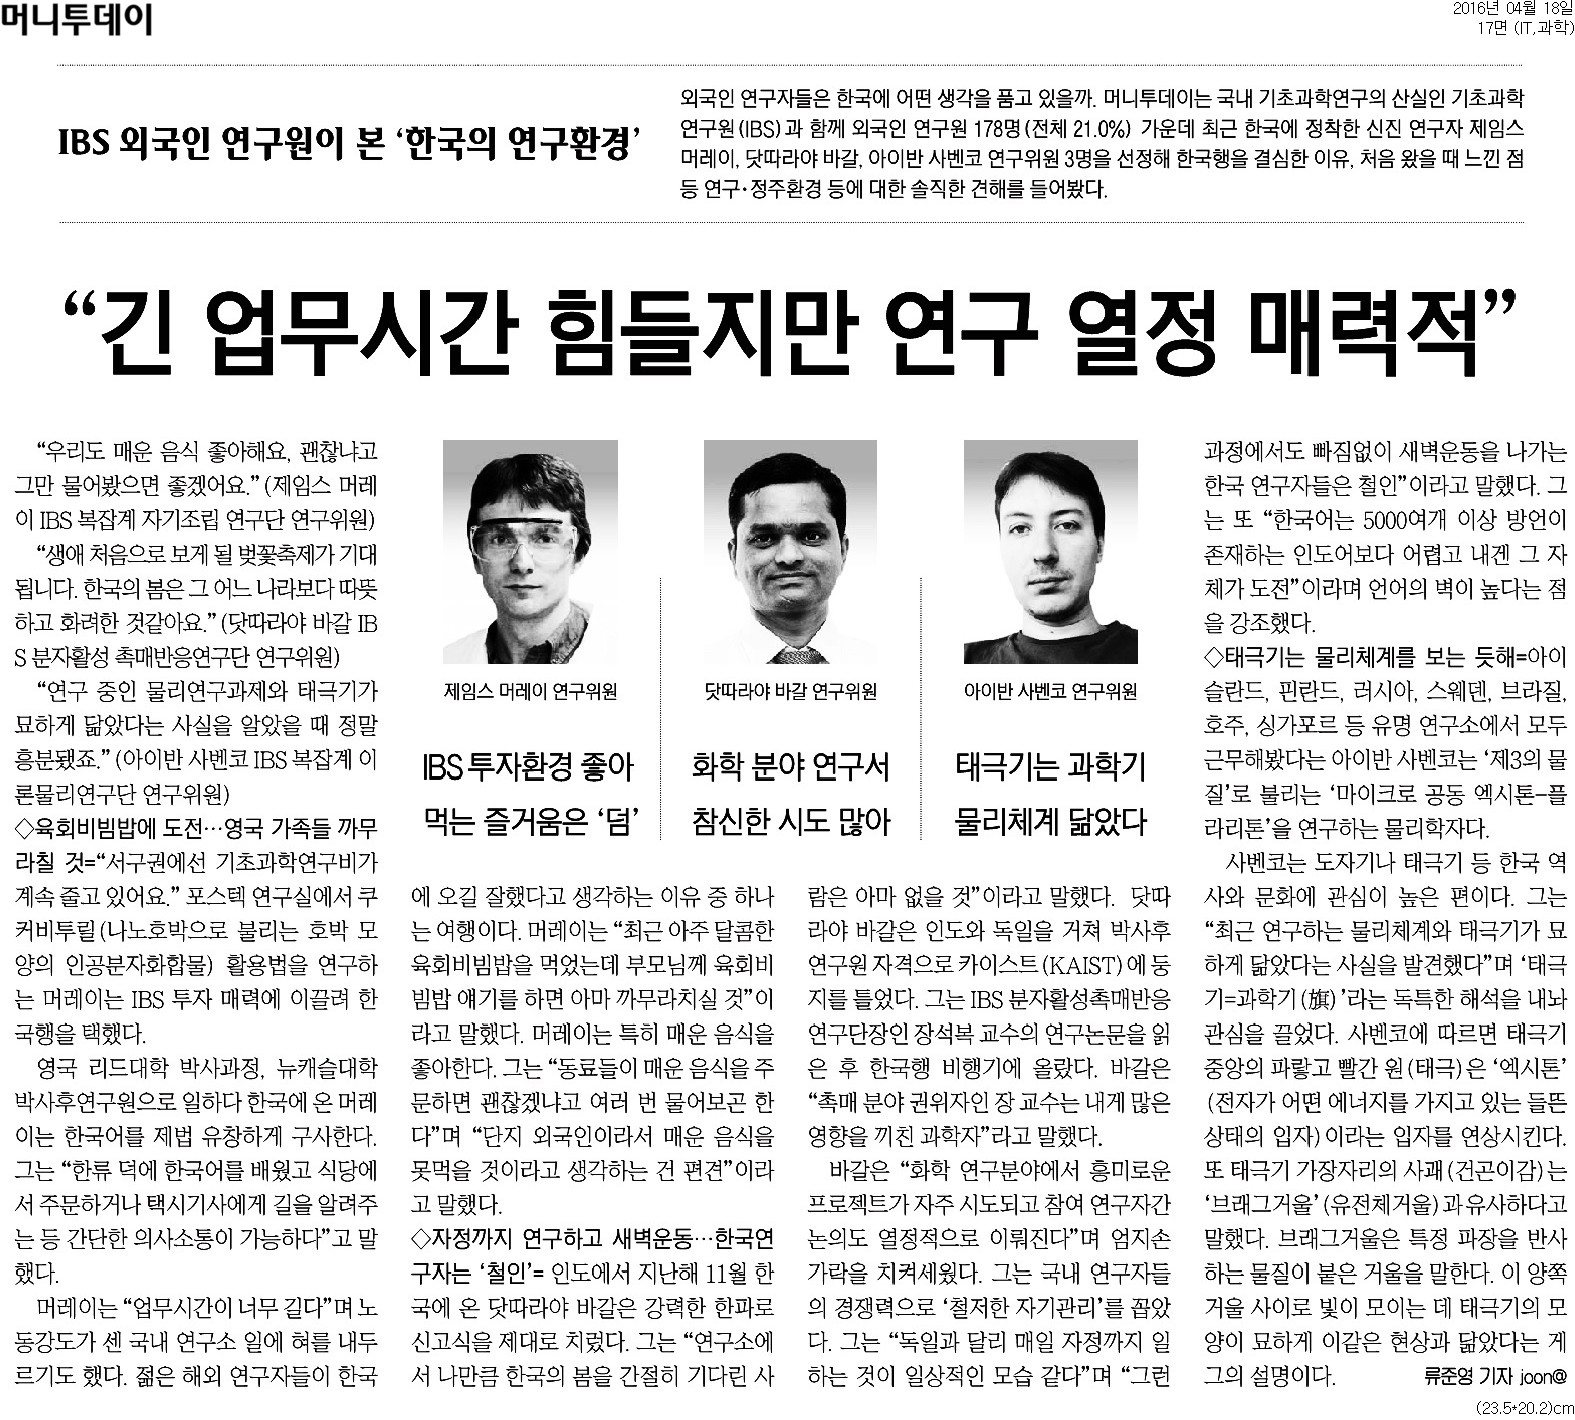 [Korean Media] Interview with IBS foreign researchers